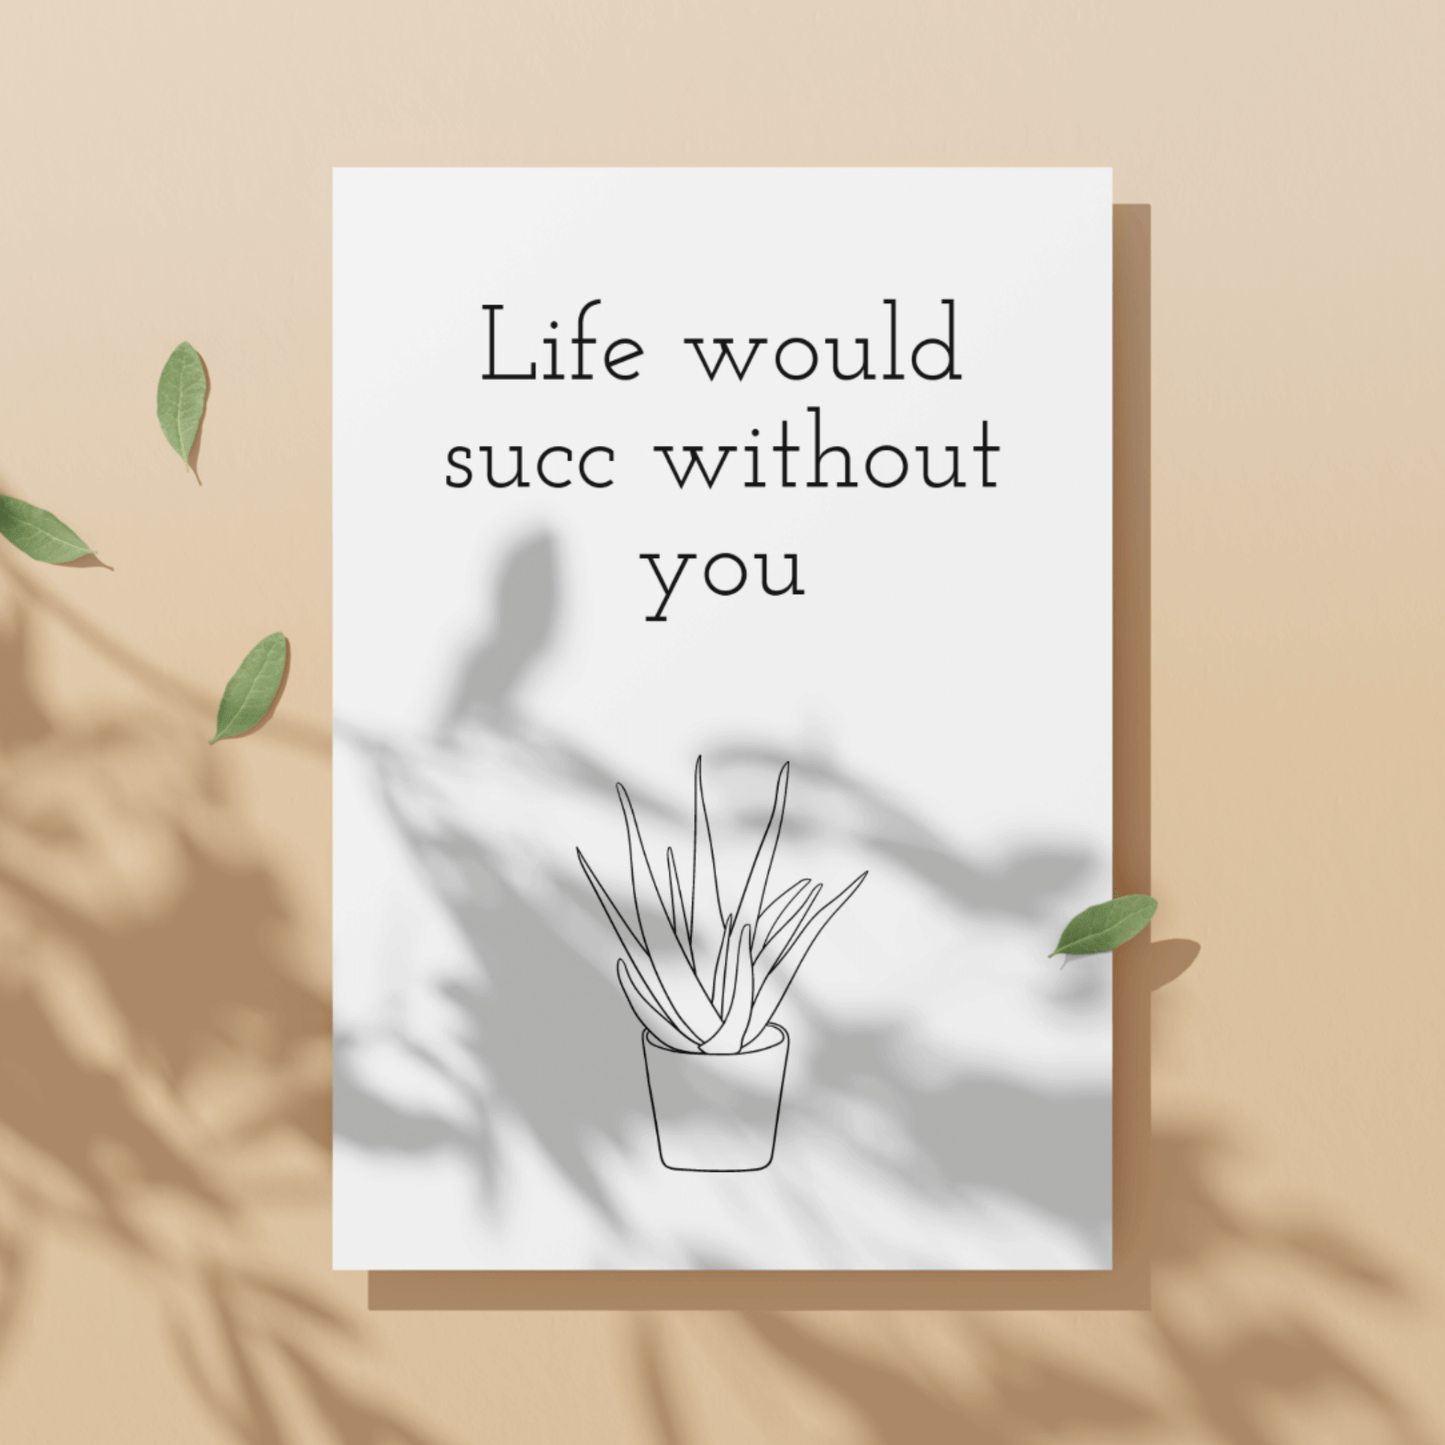 Little Kraken's Life Would Succ Without You | Funny Love Anniversary Card | Funny Aloe Vera Love Card, Love Cards for £3.50 each